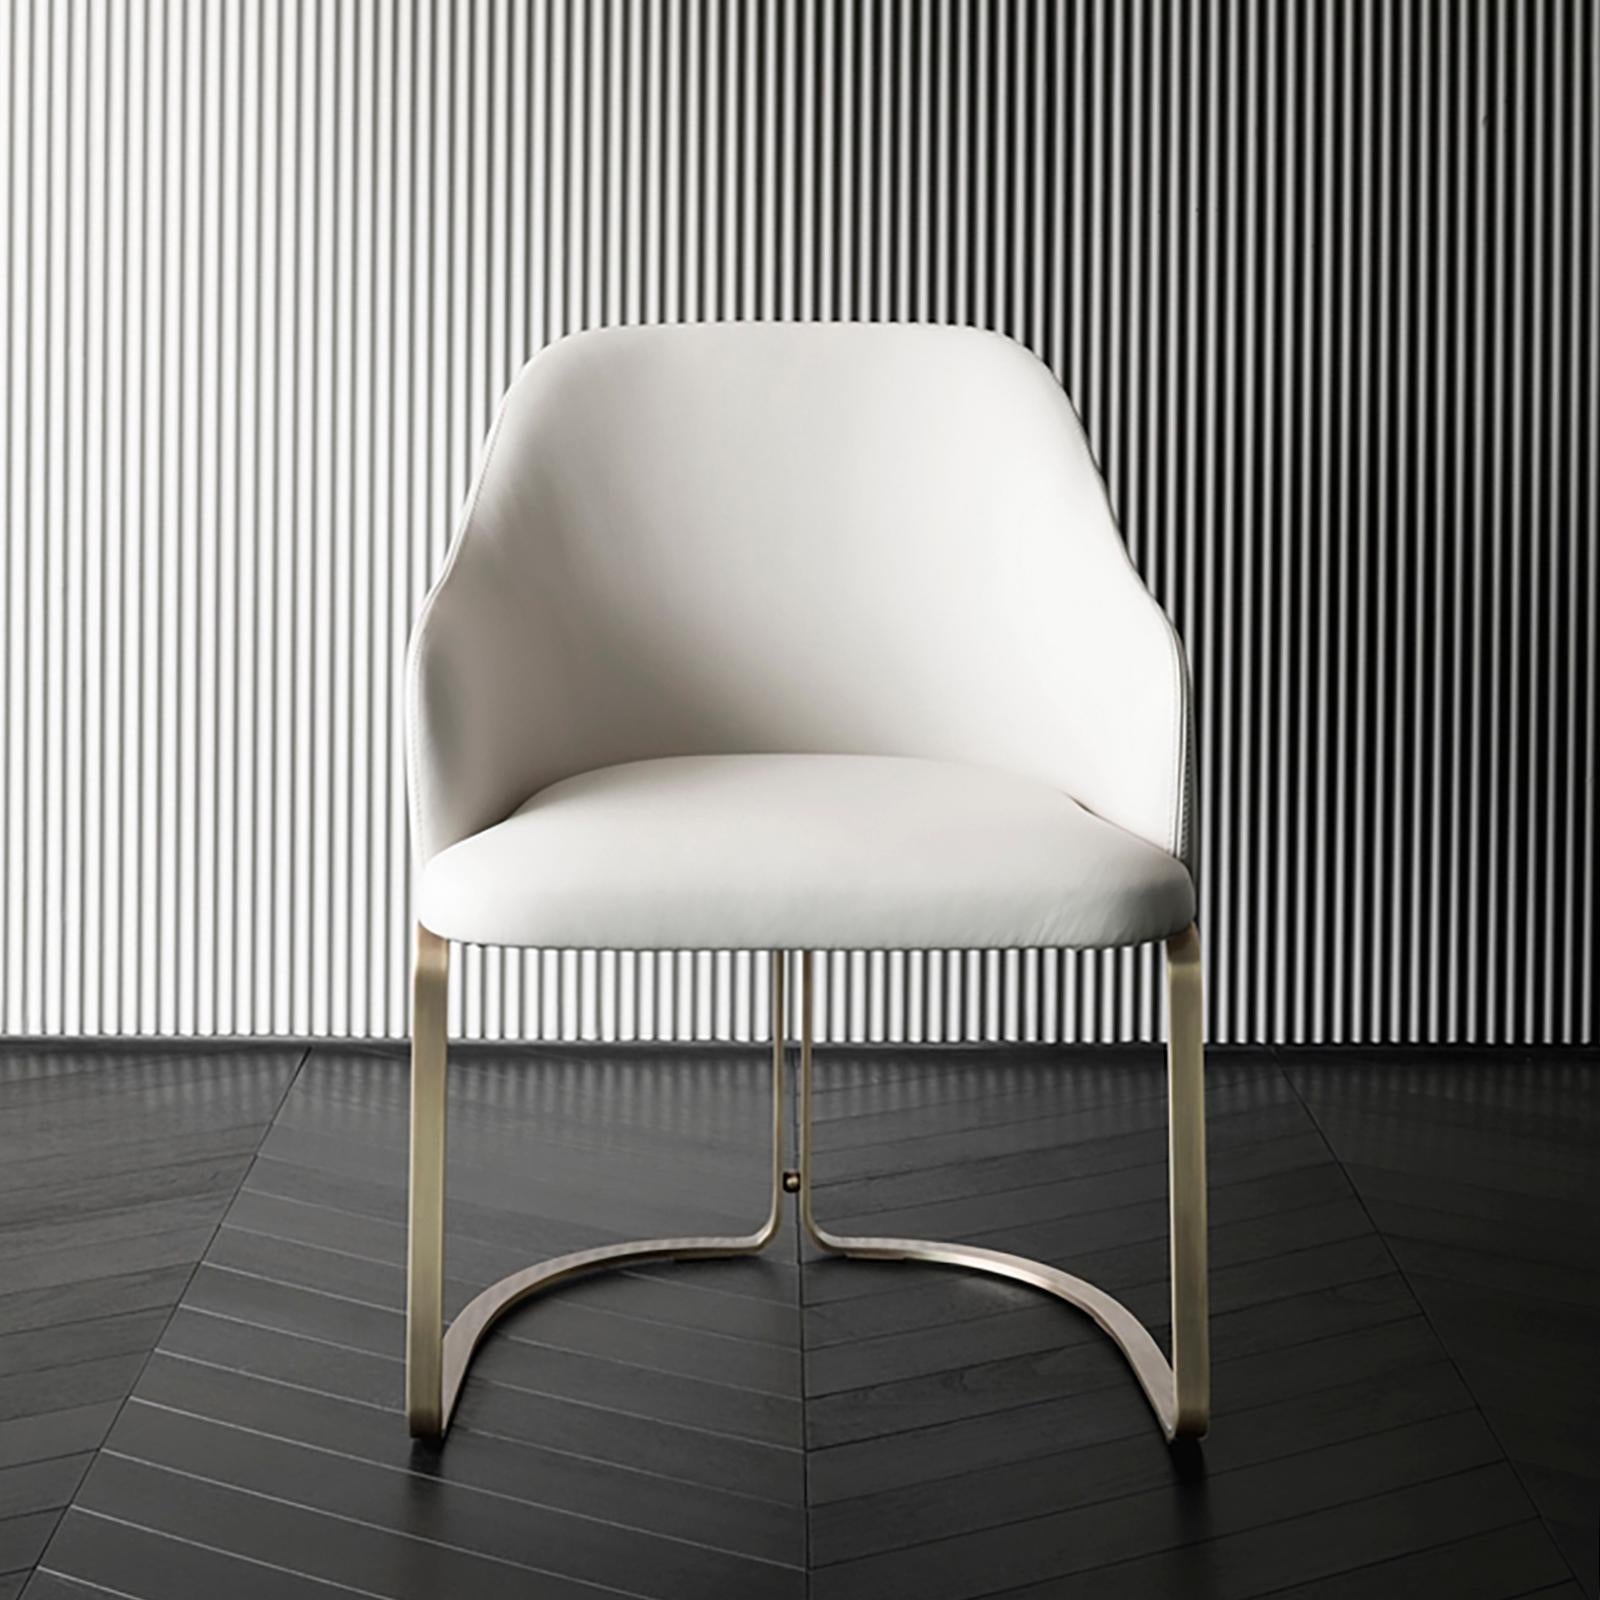 Armchair Sybil with structure in solid wood,
with bronze base, upholstered and covered 
with italian high quality white leather.
Also available with fabric or other leather colors
on request.
     